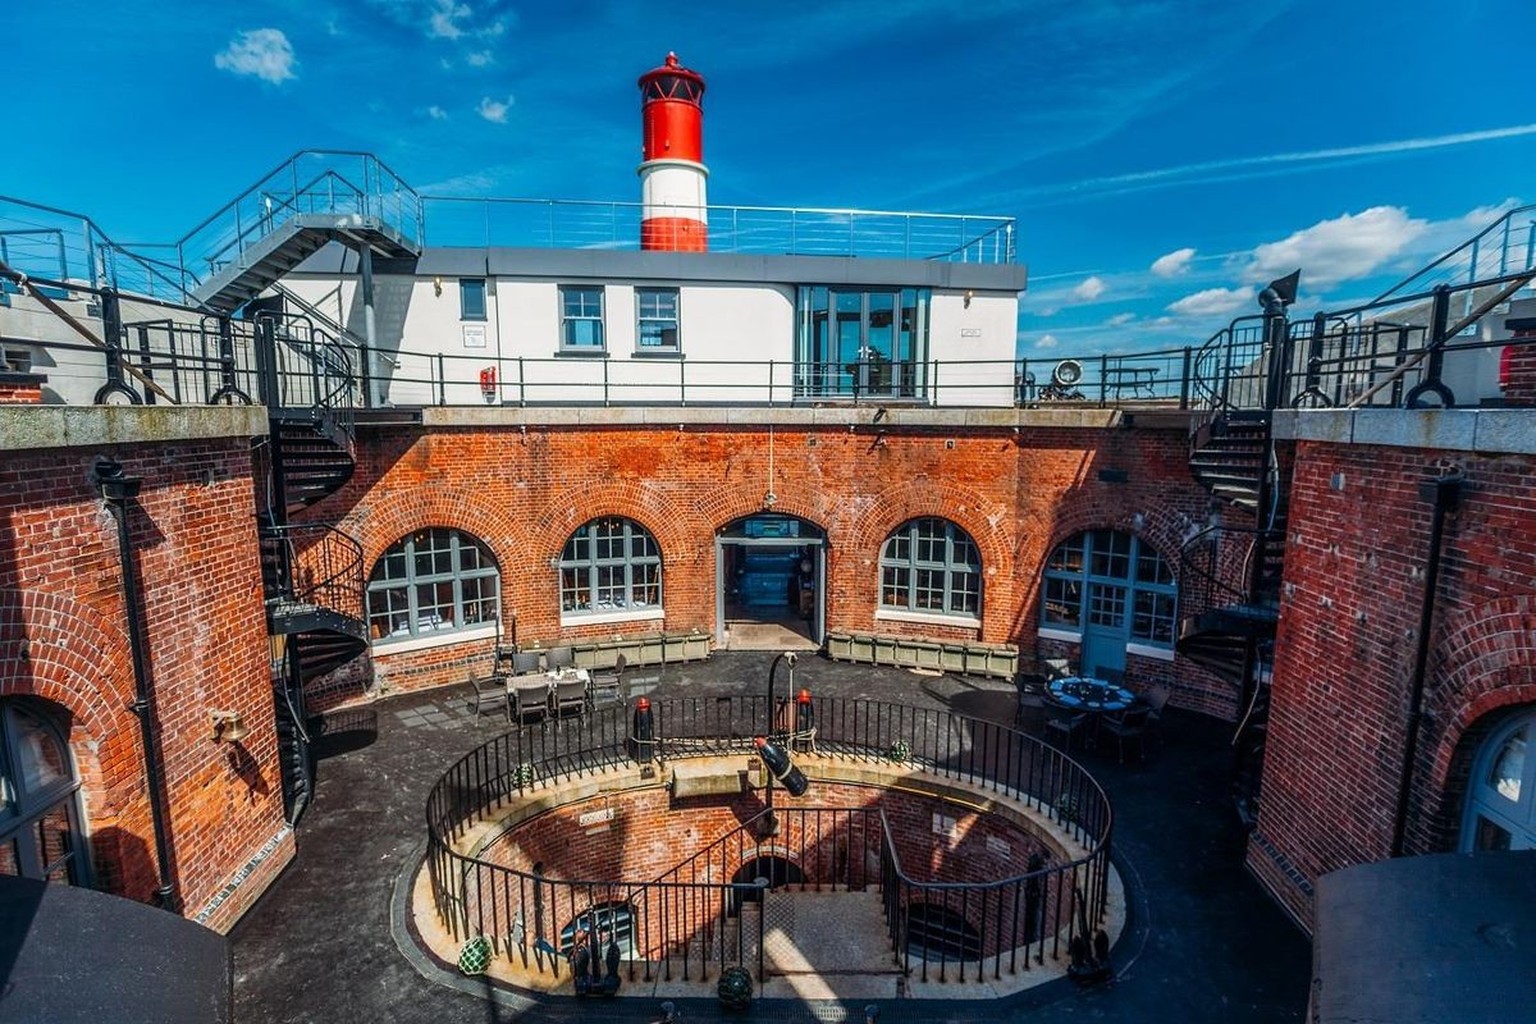 Spitbank Fort Solent Sea Forts, Portsmouth https://www.zoopla.co.uk/for-sale/details/60033914/?search%5C_identifier=250a332526d5c3017672b607515f1d10